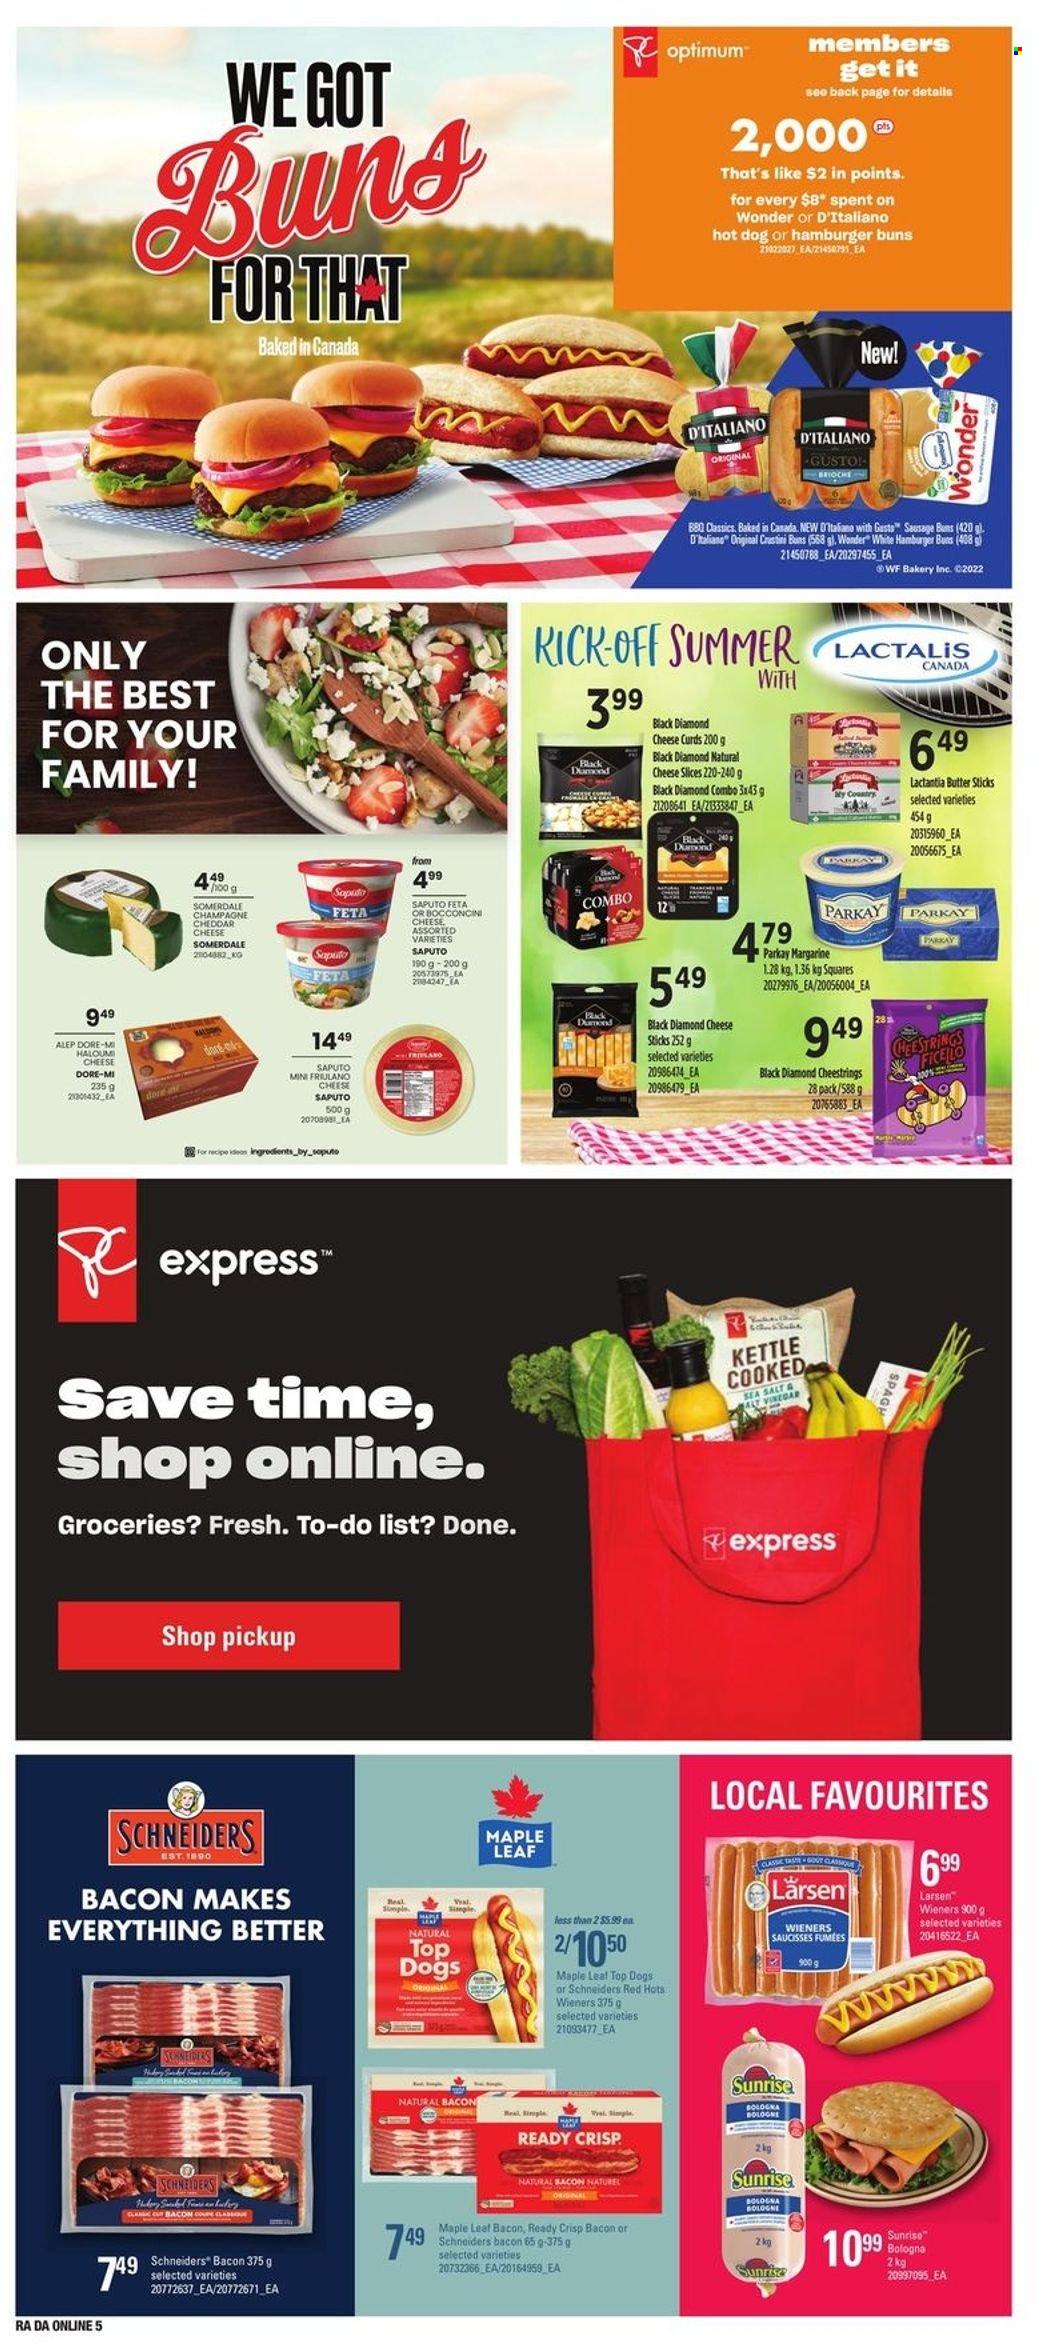 Atlantic Superstore flyer  - May 19, 2022 - May 25, 2022.